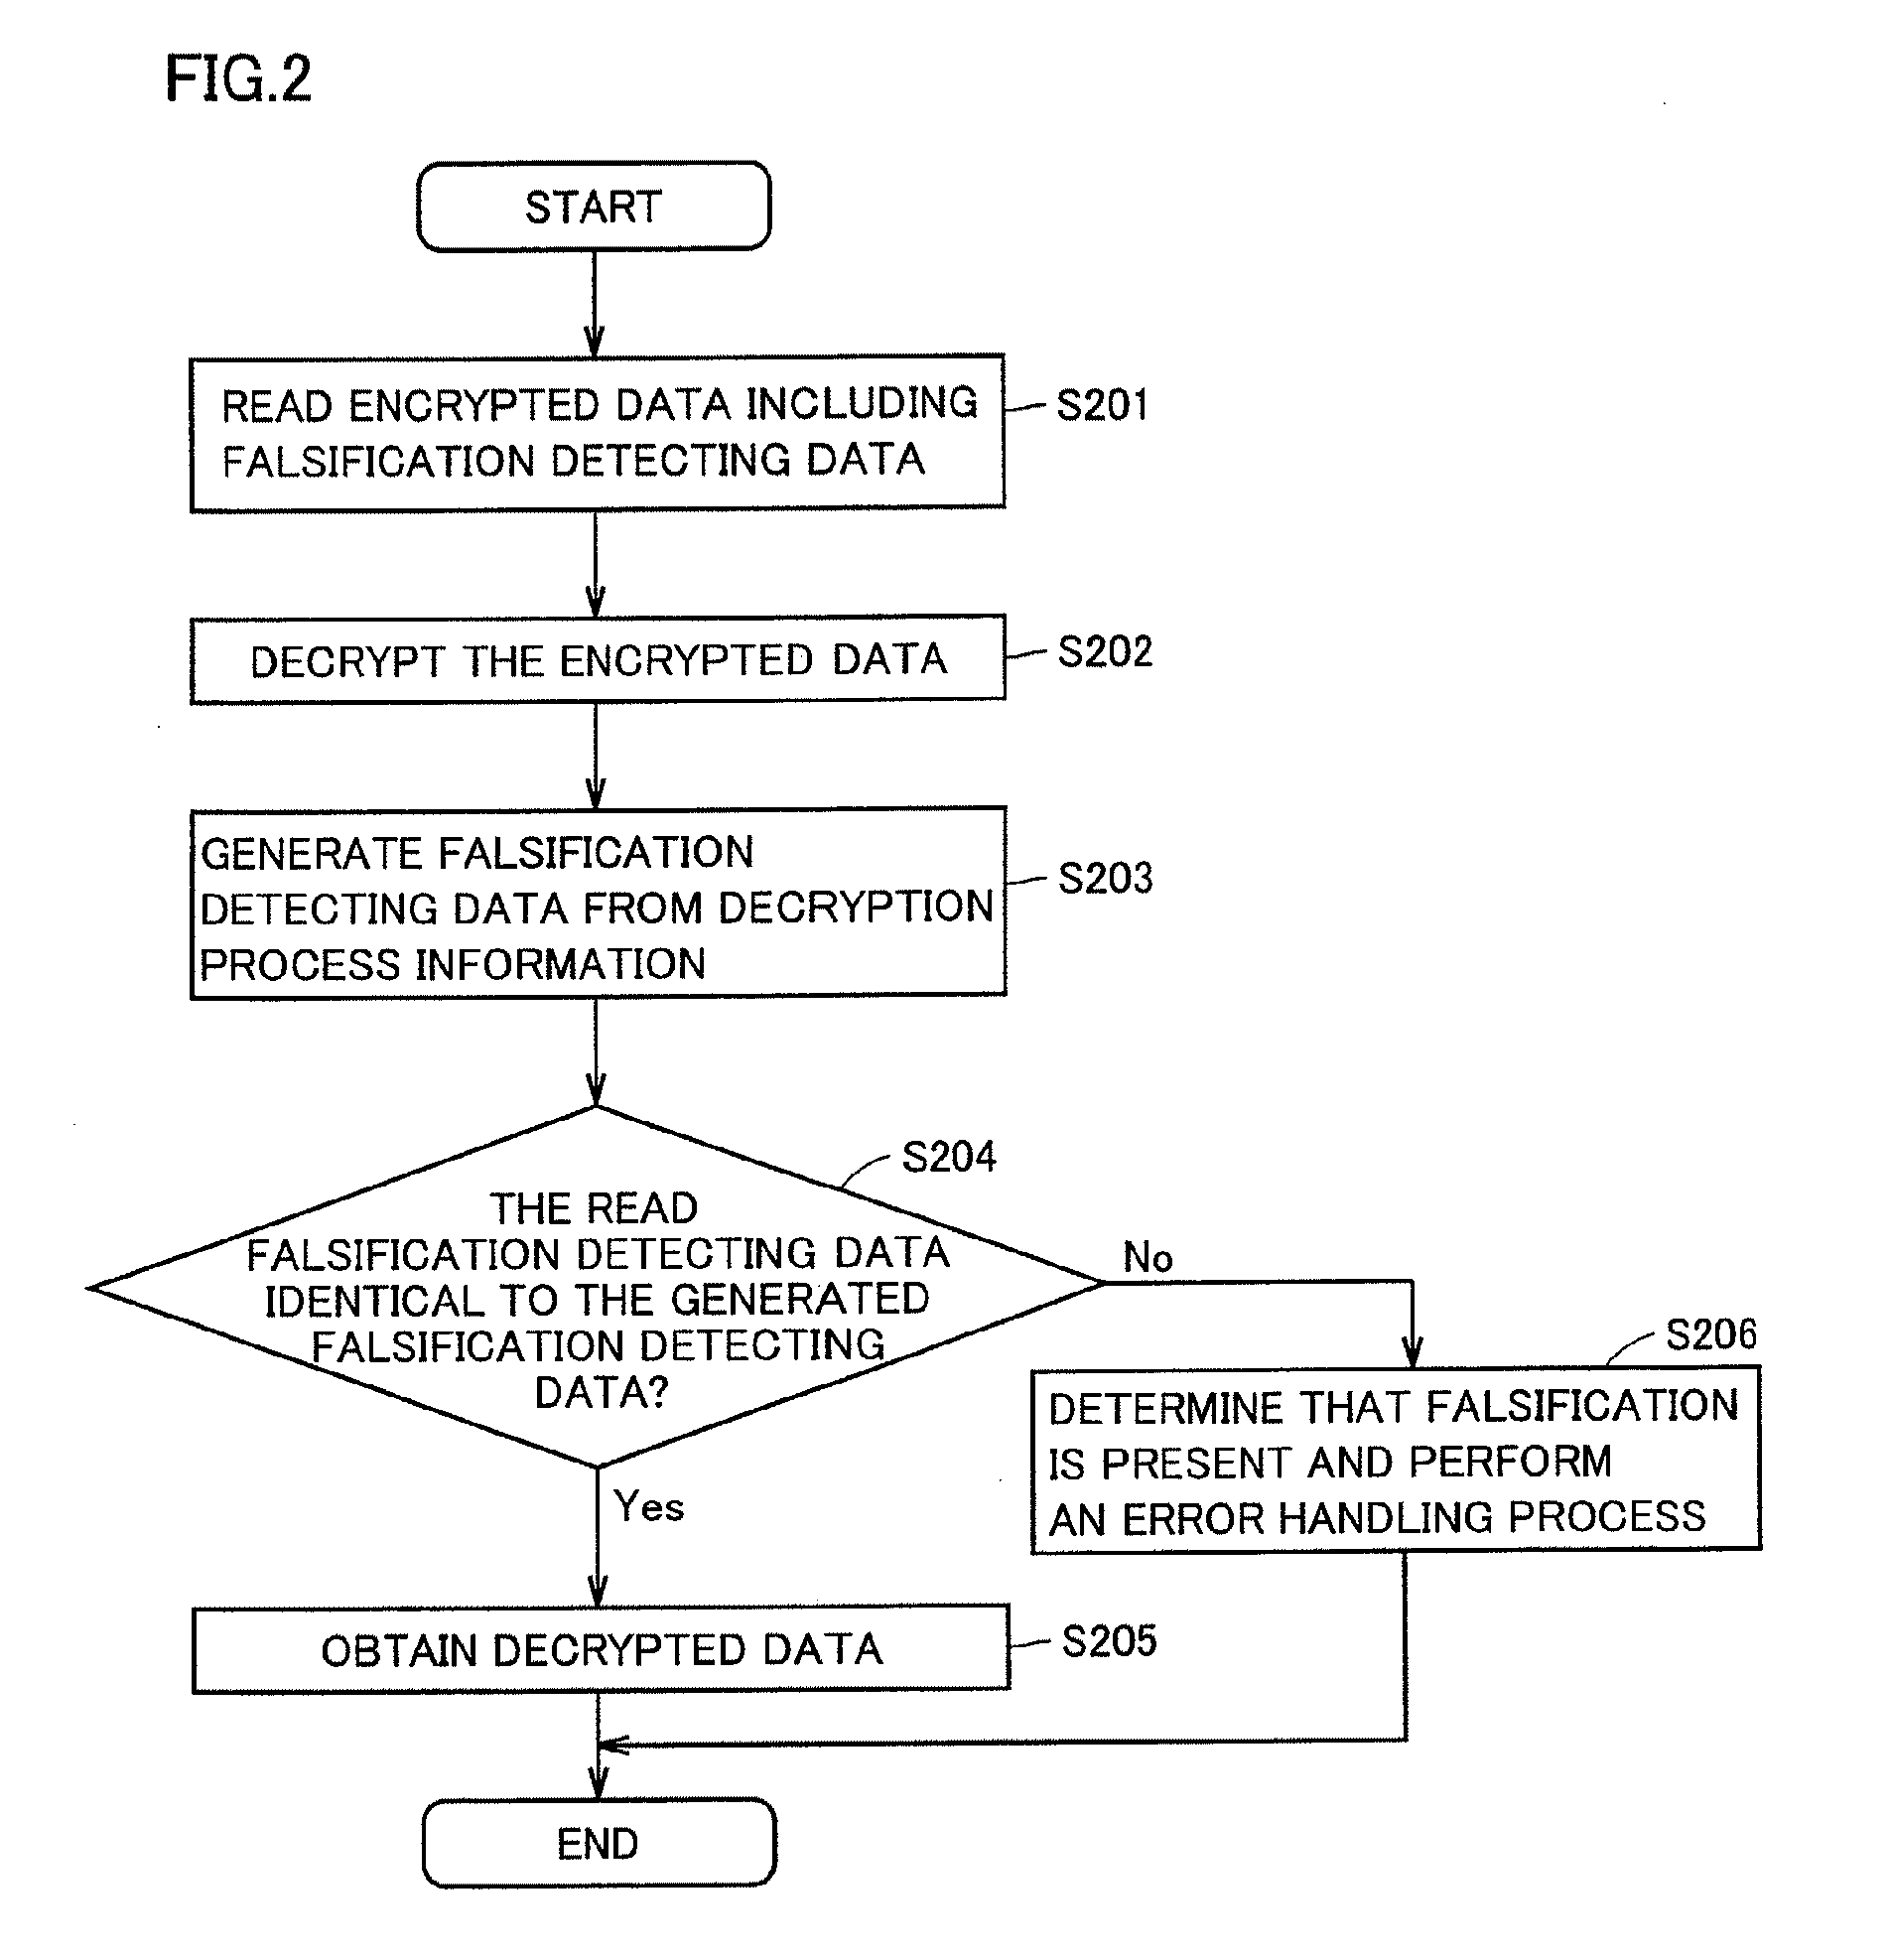 Apparatus and method of generating falsification detecting data of encrypted data in the course of process